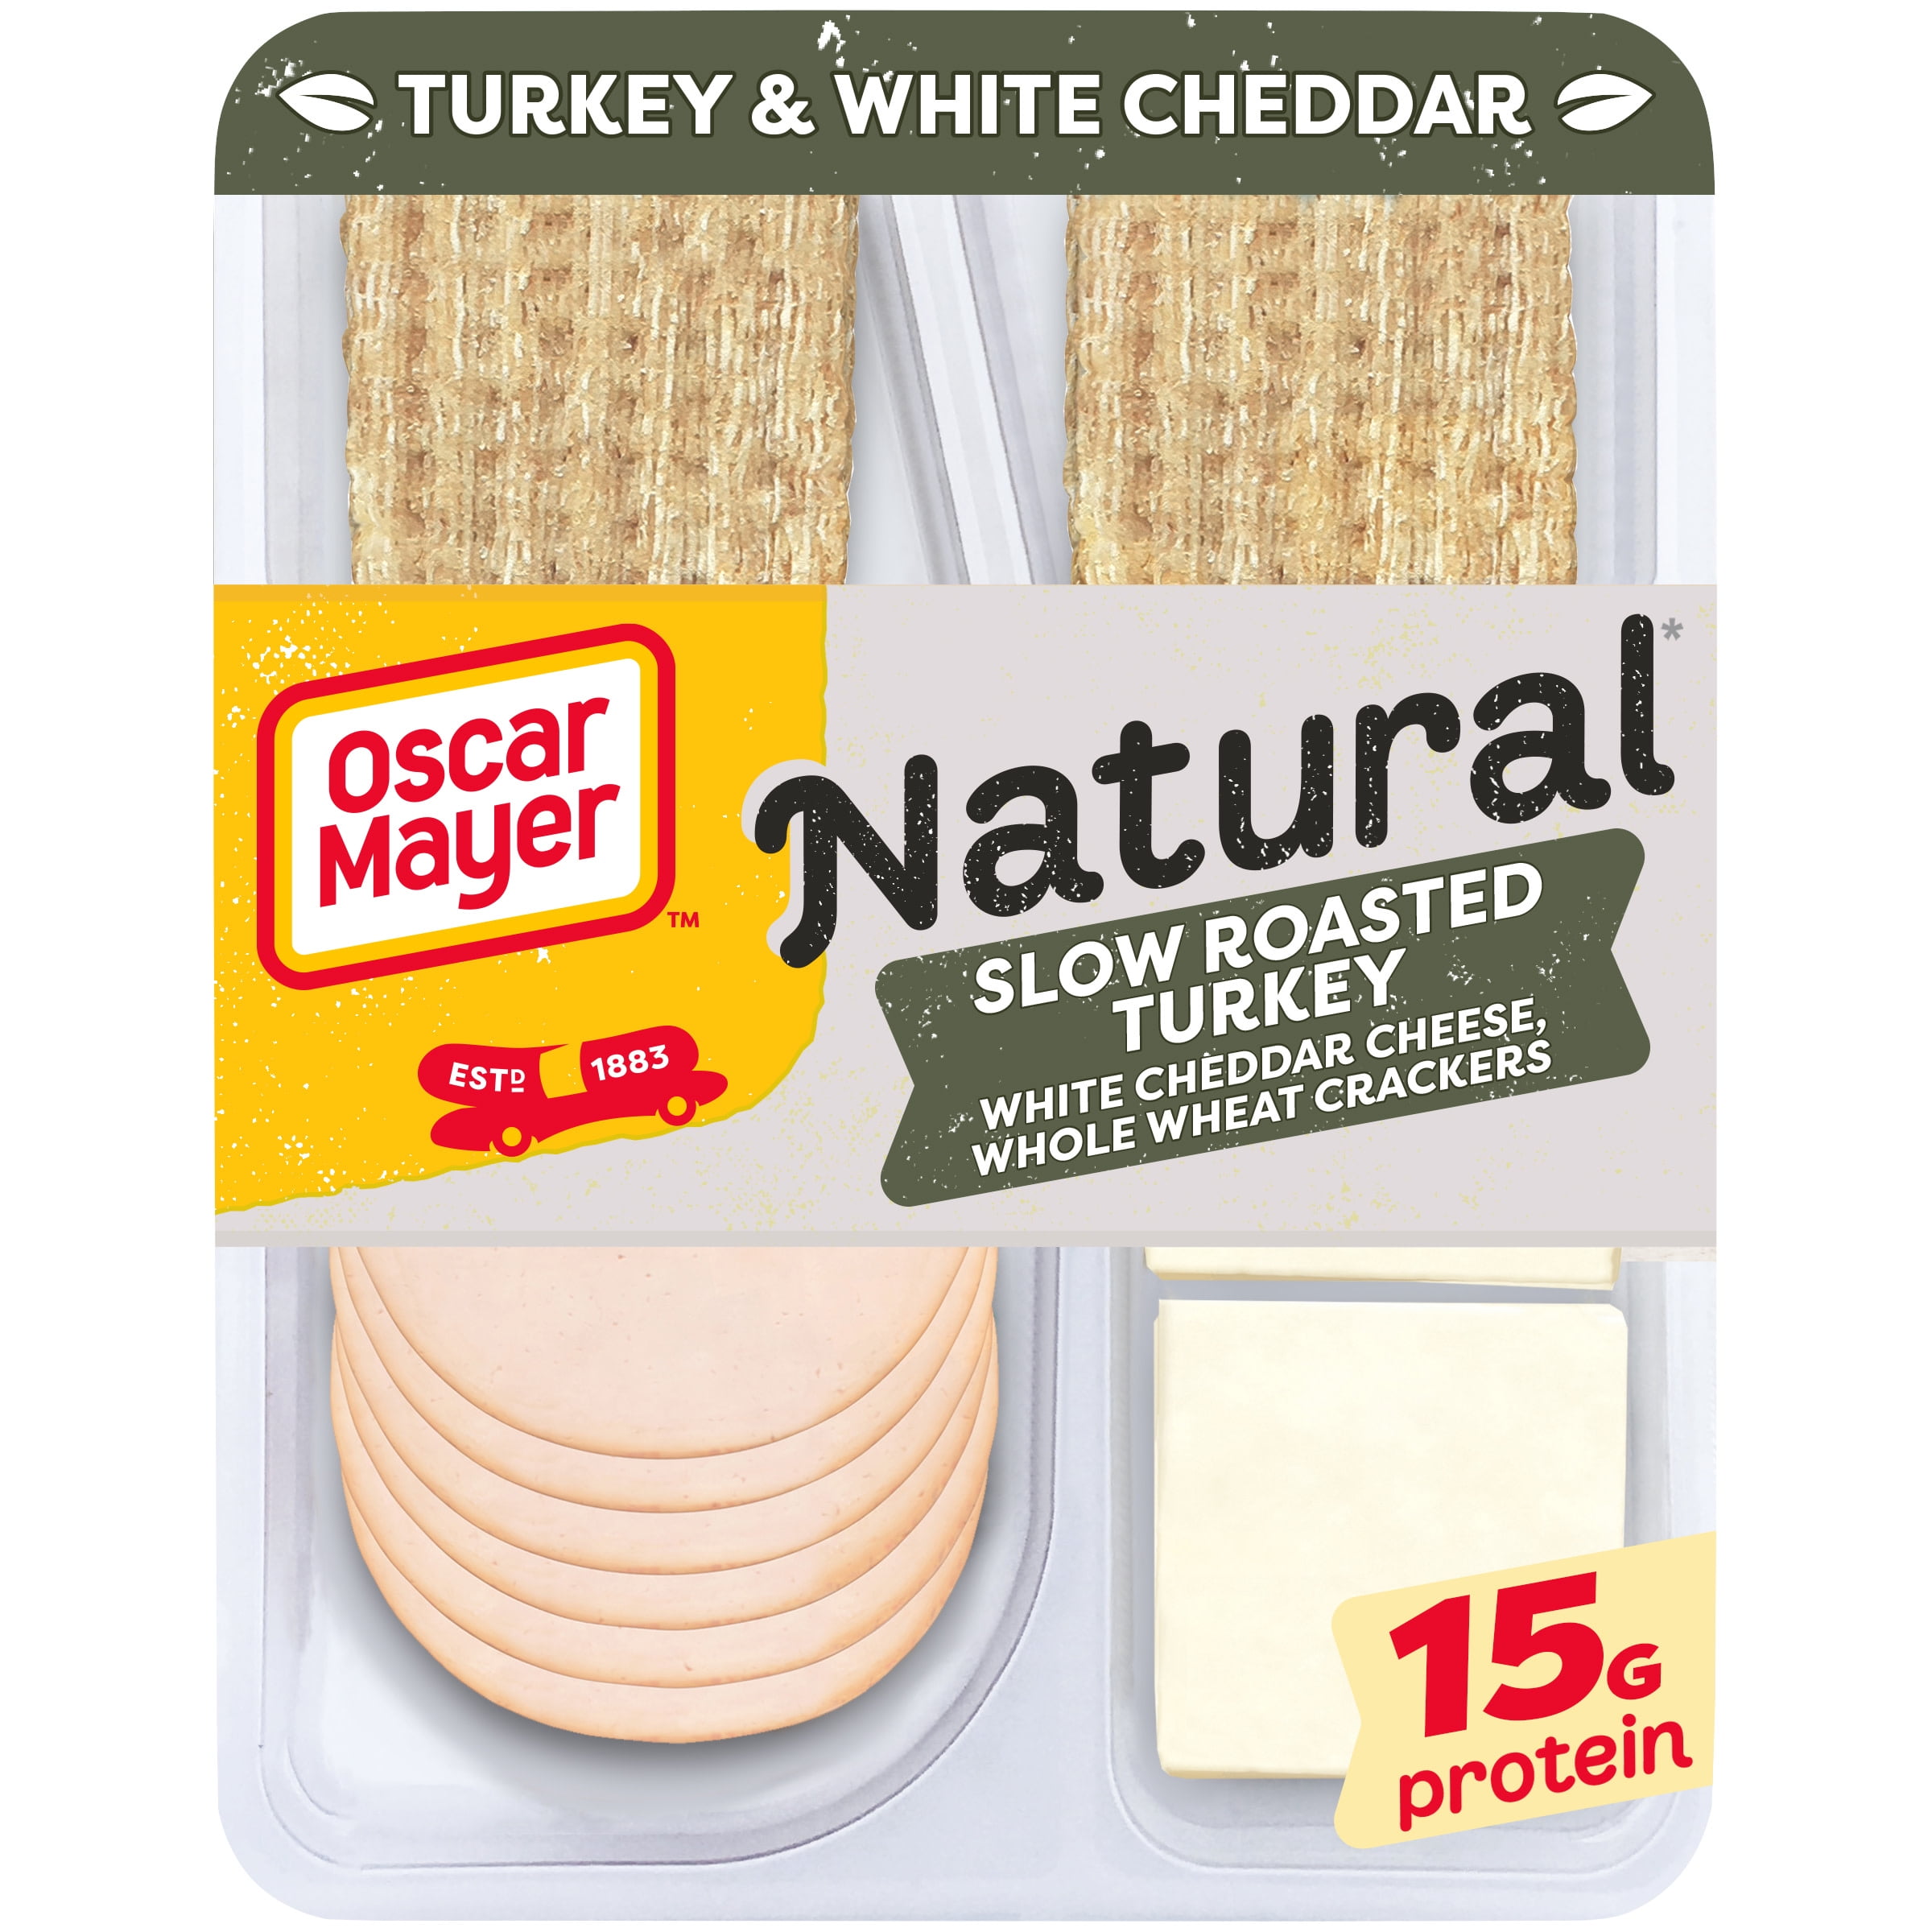 Oscar Mayer Natural Meat & Cheese Snack Plate with Slow Roasted Turkey, White Cheddar Cheese & Whole Wheat Crackers, 3.3 oz. Tray